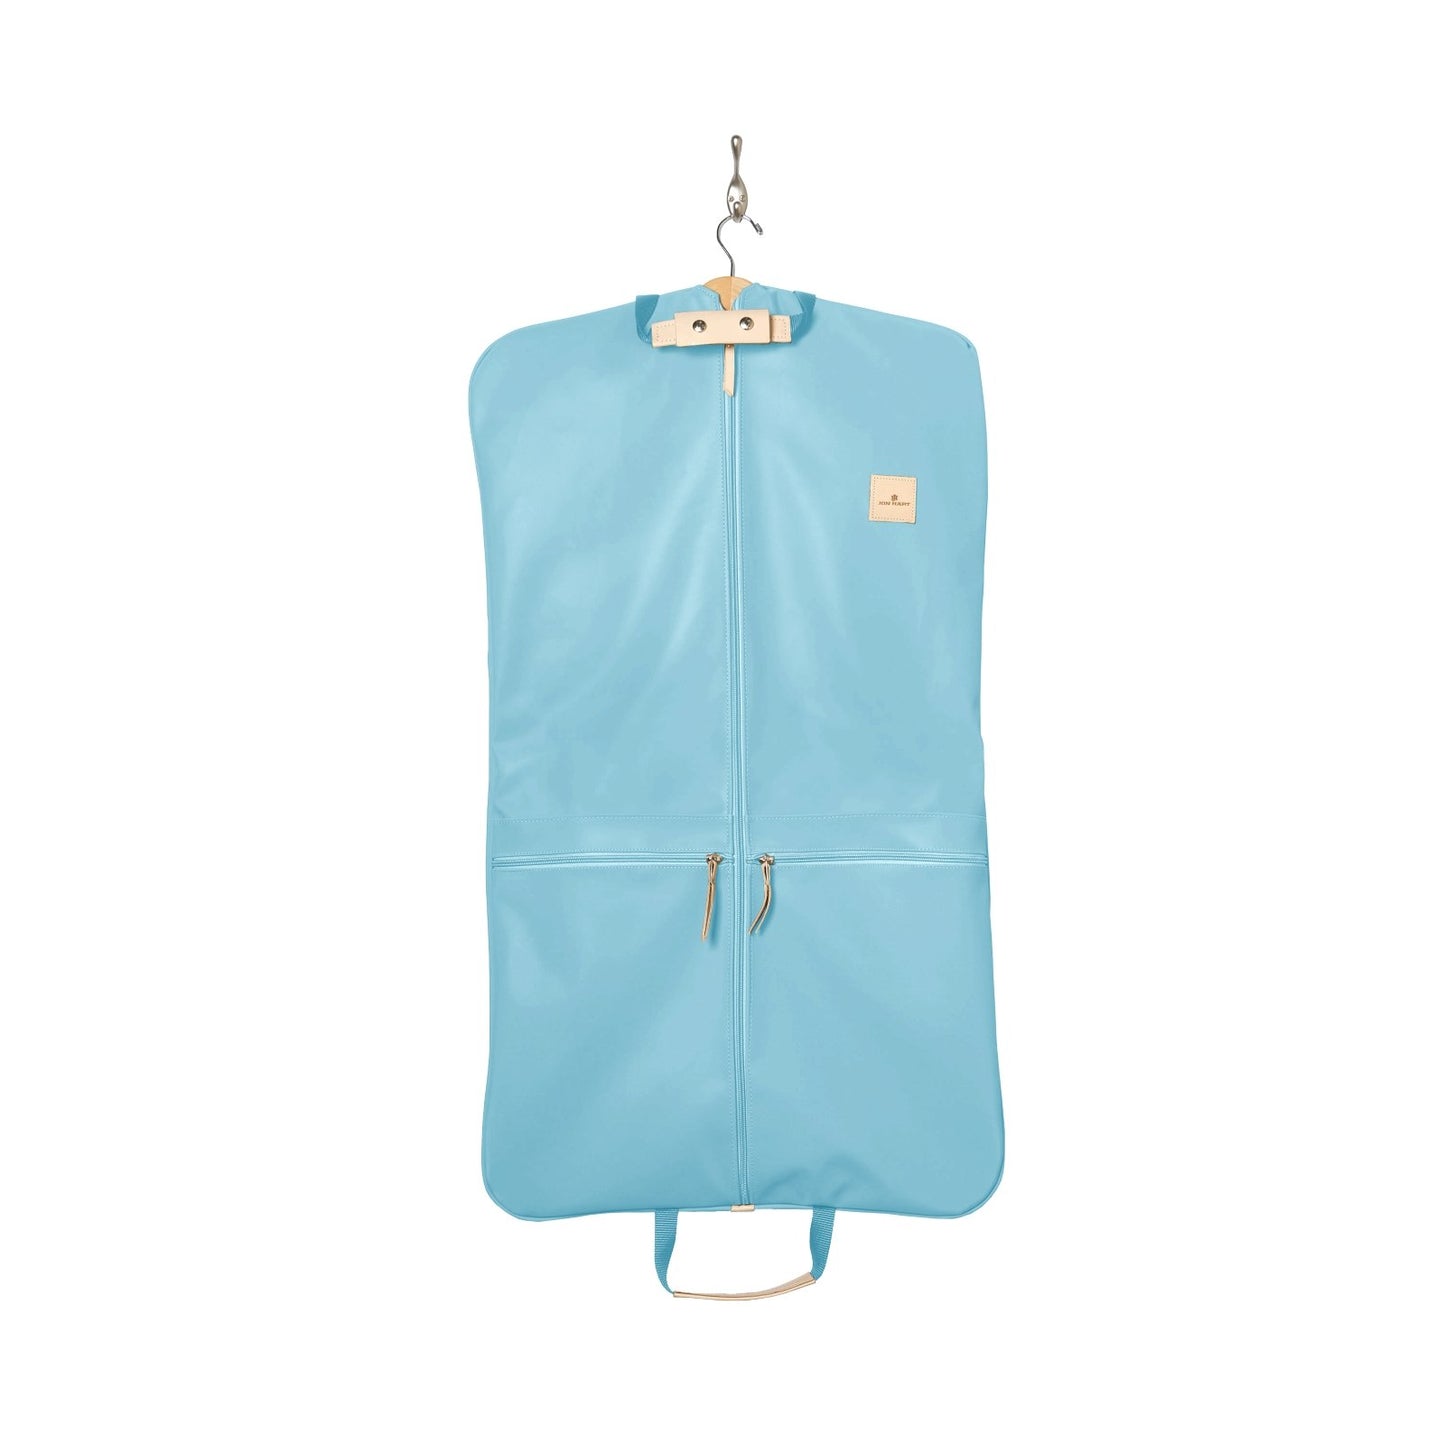 Two-Suiter (Order in any color!) Garment Bags Jon Hart Ocean Blue Coated Canvas  